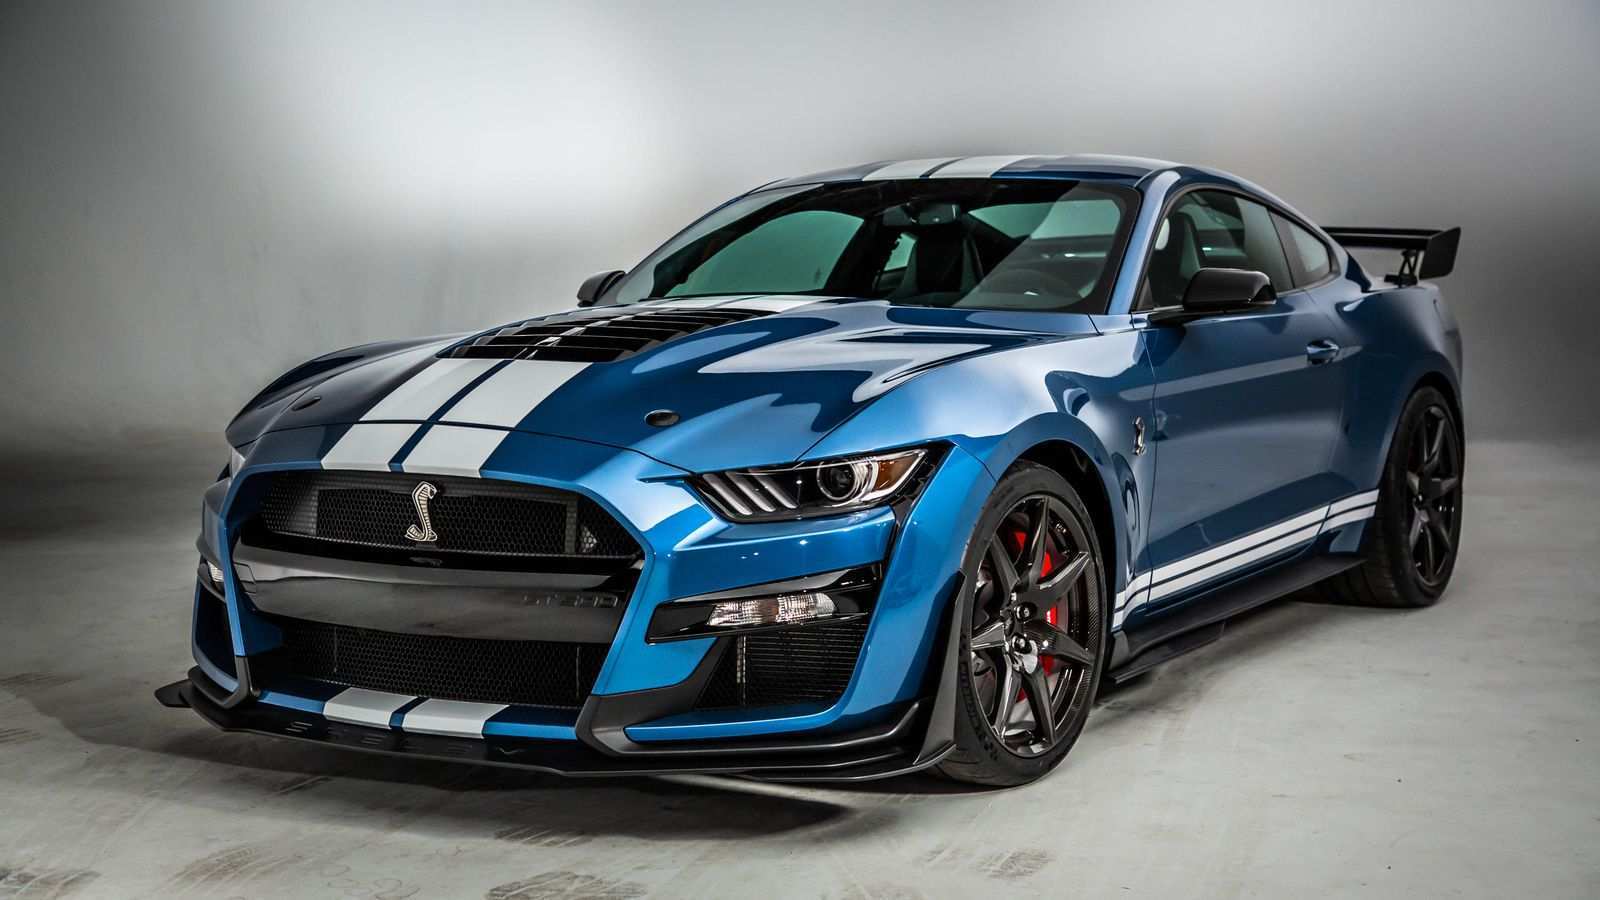 Gallery Of Ford Mustang Image Specs With